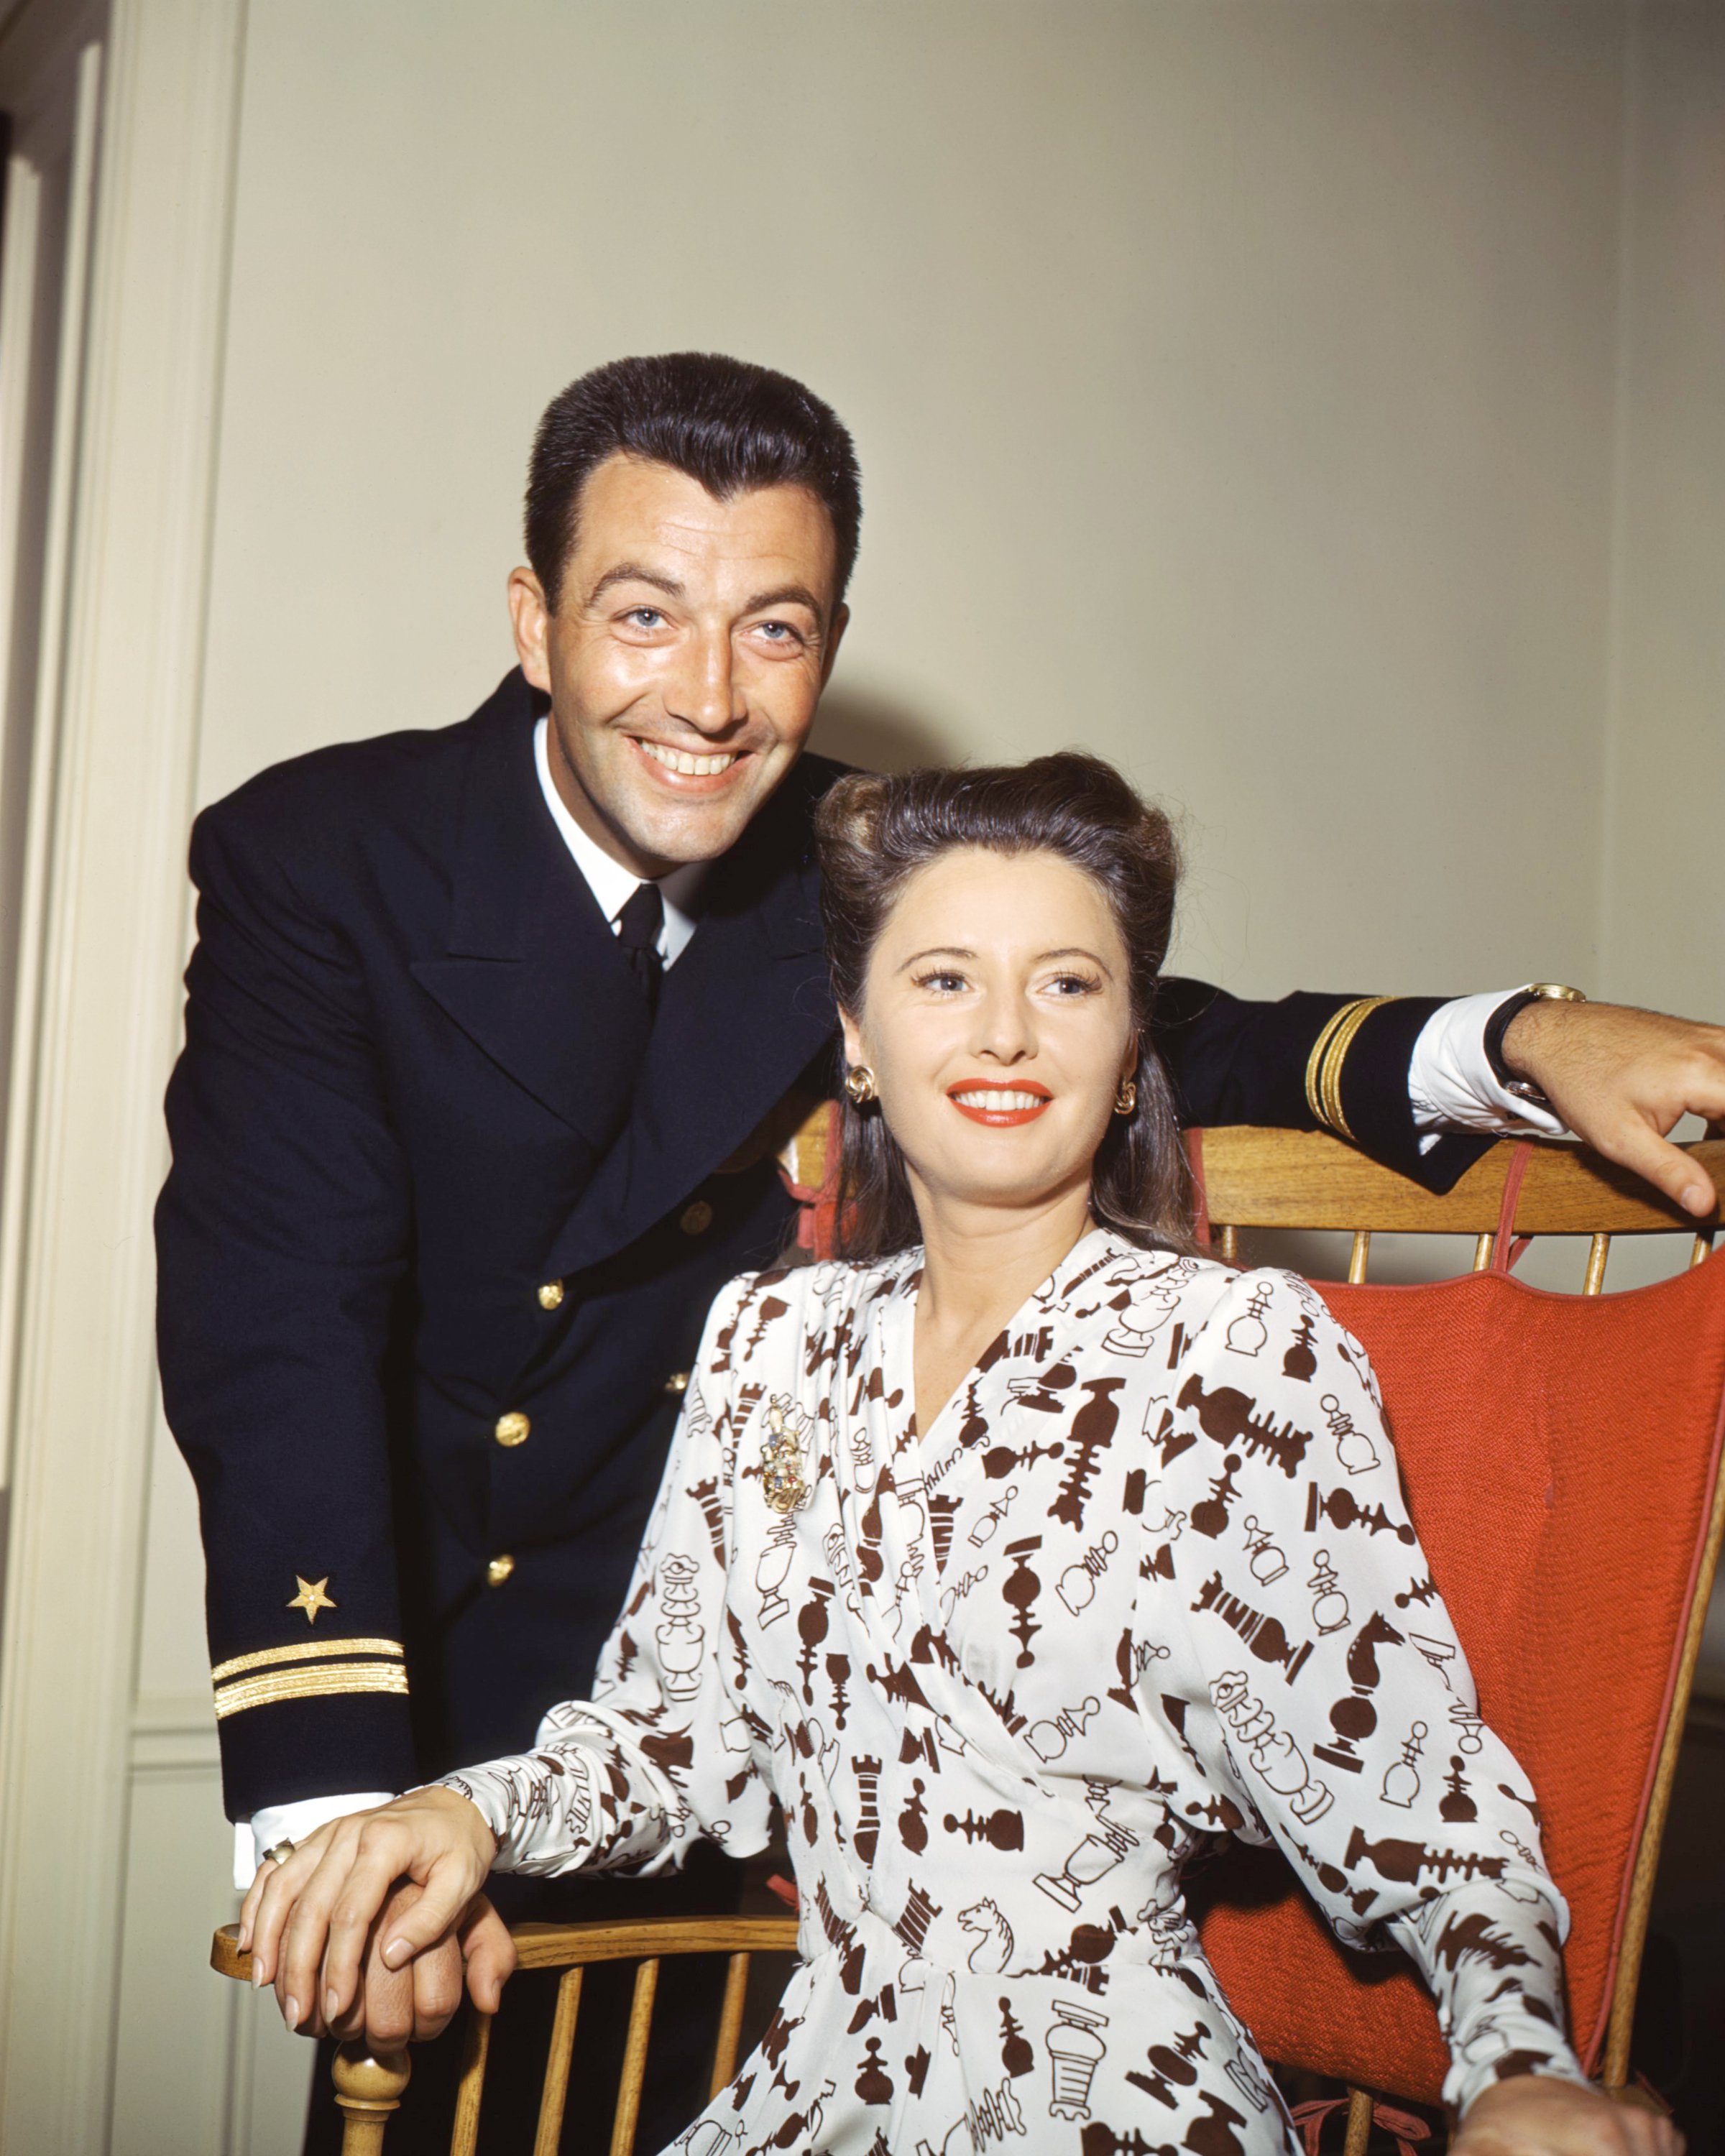 American actors Robert Taylor (1911 - 1969) and his wife Barbara Stanwyck (1907 - 1990), circa 1945. Taylor is wearing the uniform of the United States Naval Air Corps. | Source: Getty Images